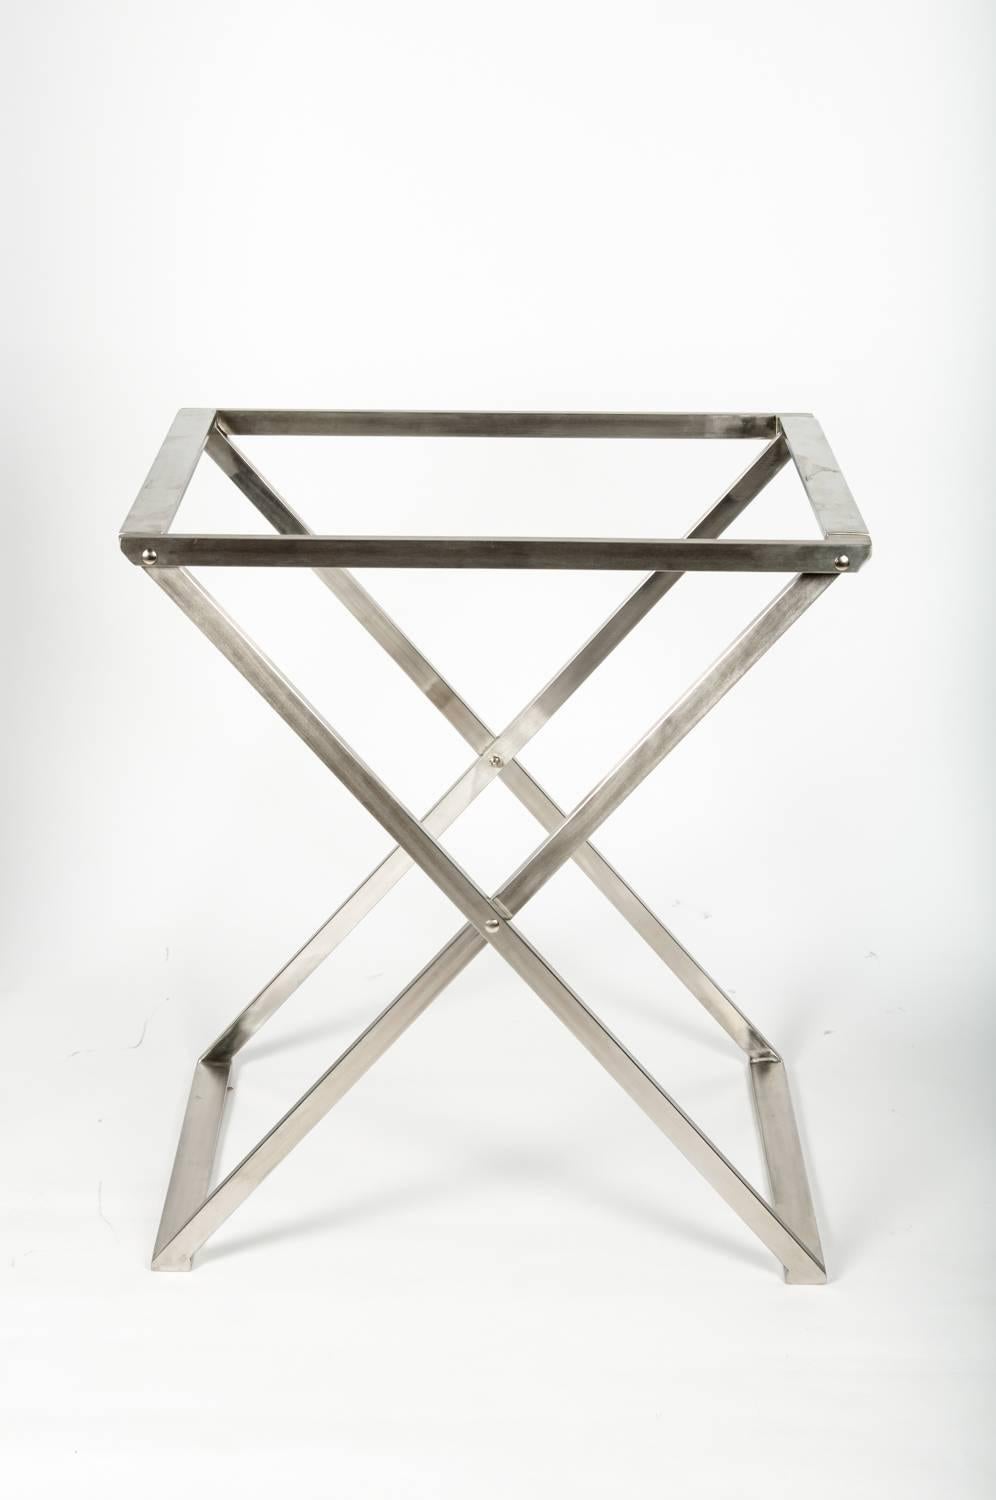 North American Mid-Century Modern Bar Cart with Detachable Glass Top